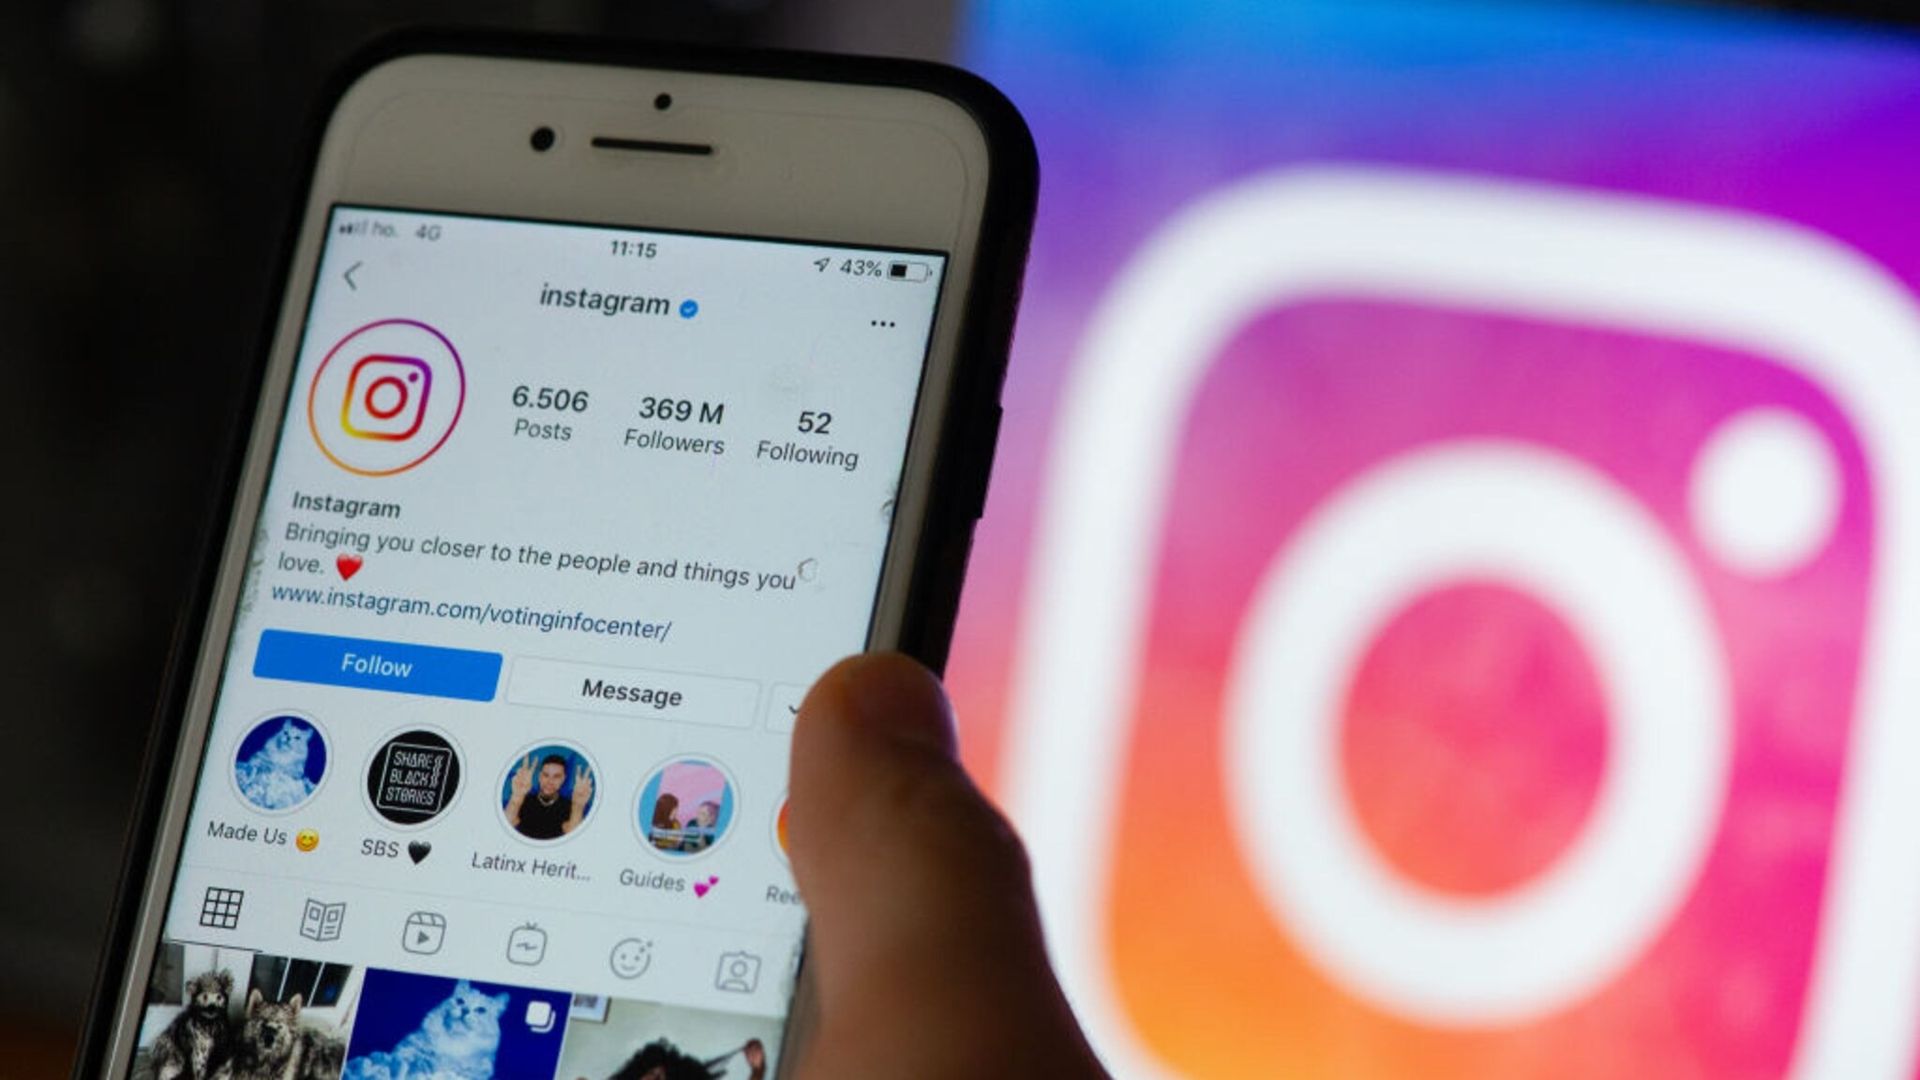 Today we are going to show you how to reactivate Instagram. Are you receiving an “Sorry there was a problem with your request” message when you try to log in to Instagram? Many Instagram users have been getting this error since 2018, and it continues to exist today.